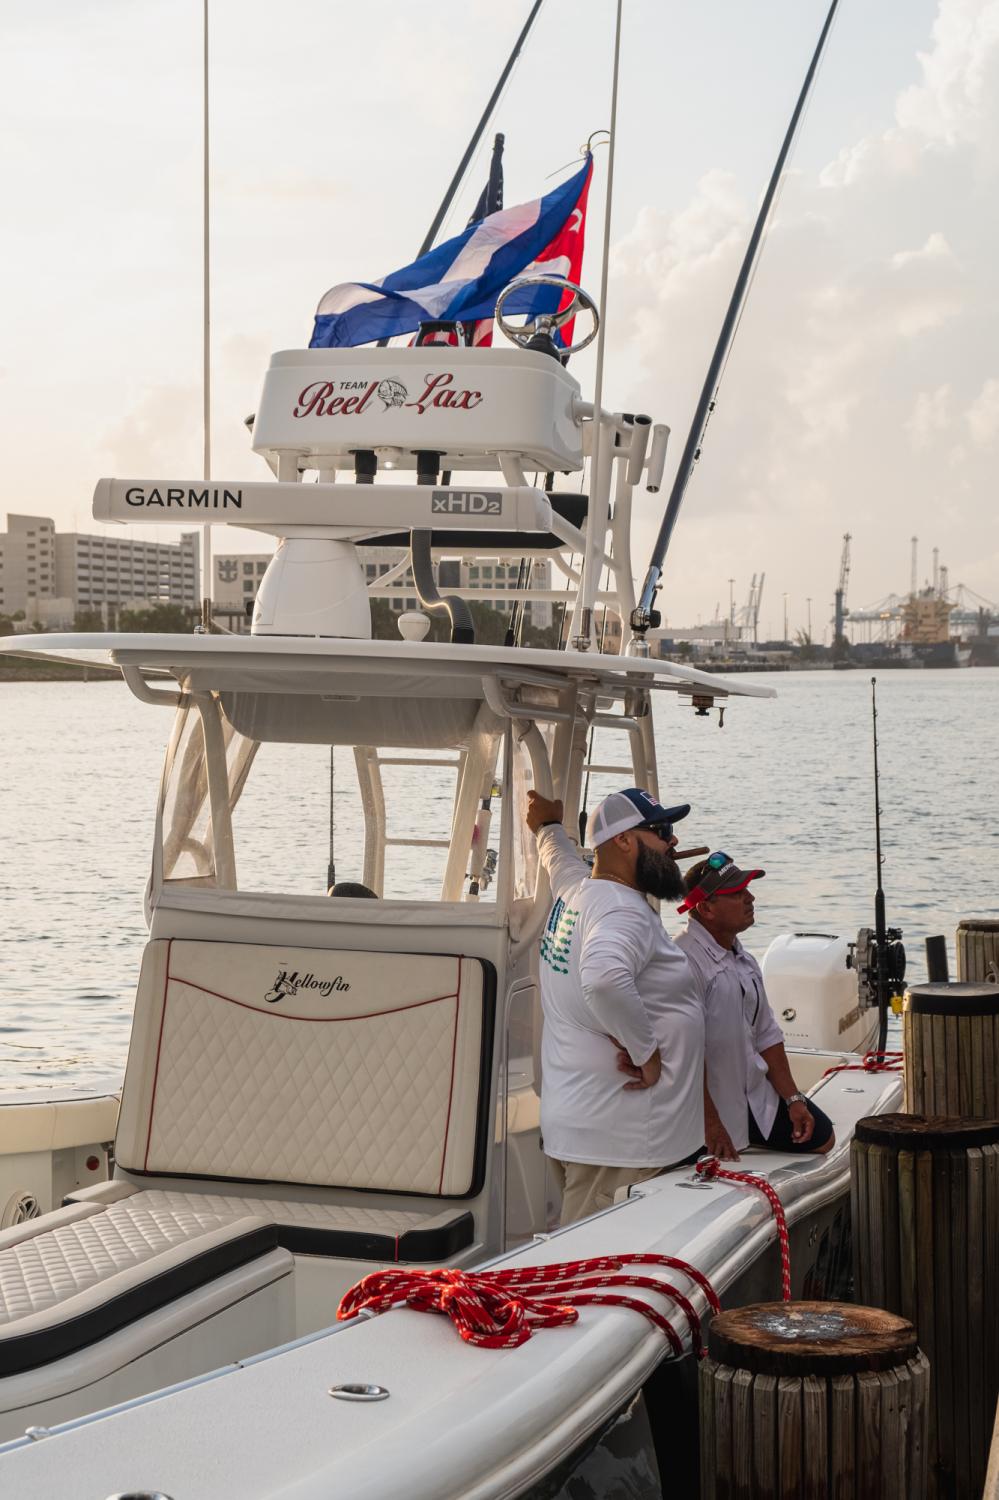  Flotilla organizers, Rey and Osdalvis, prepare their boat on its way to Cuba in solidarity with the ongoing protests. Miami, FL. July 23, 2021....